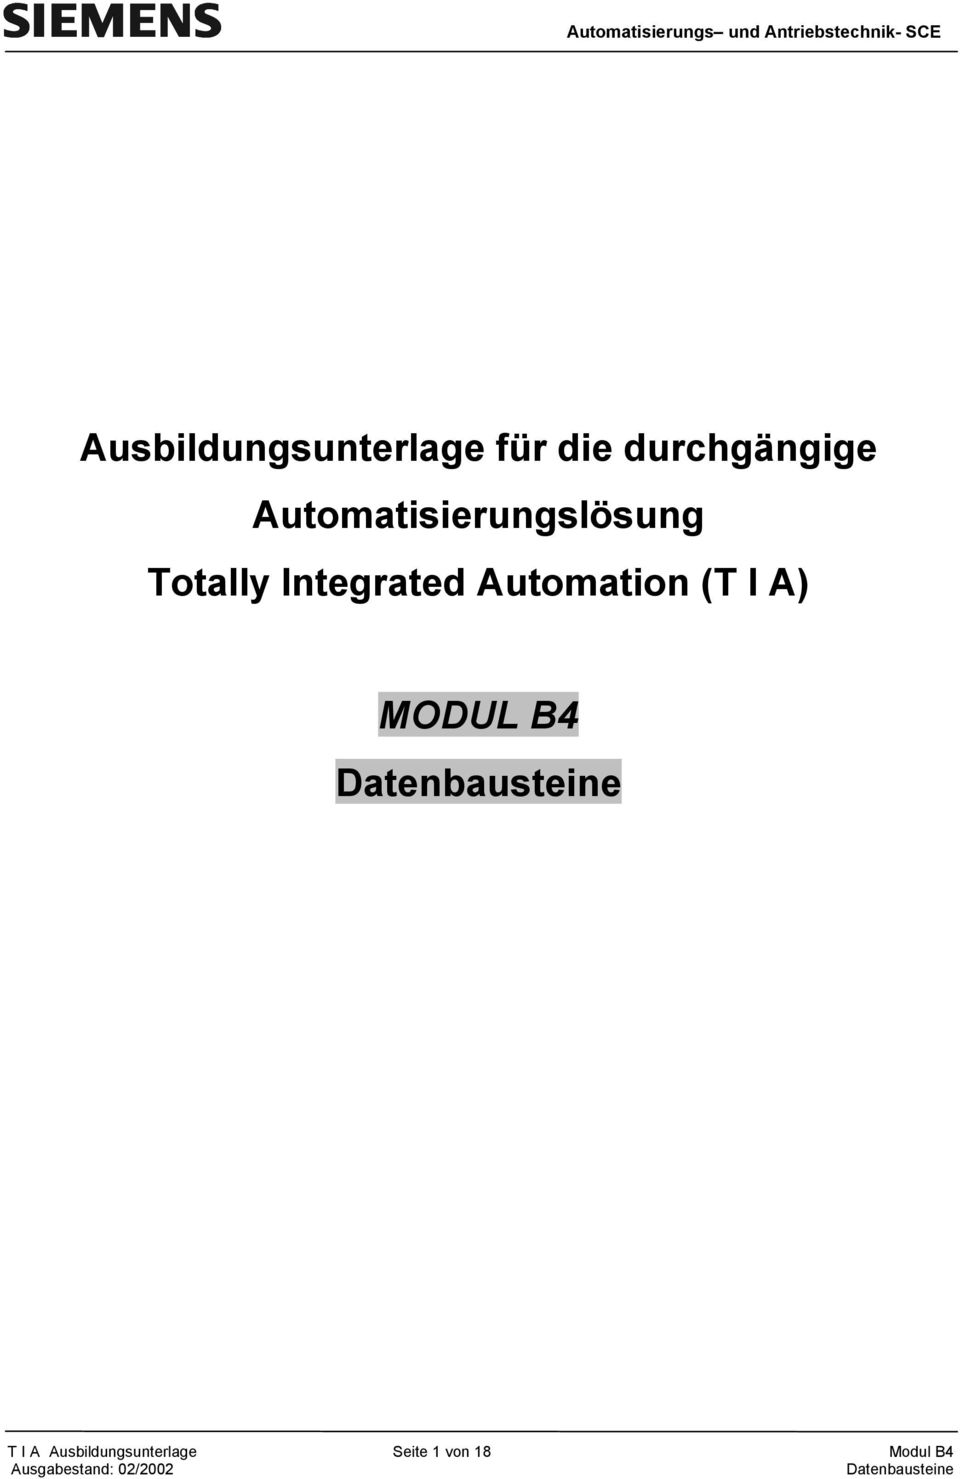 Totally Integrated Automation (T I A)